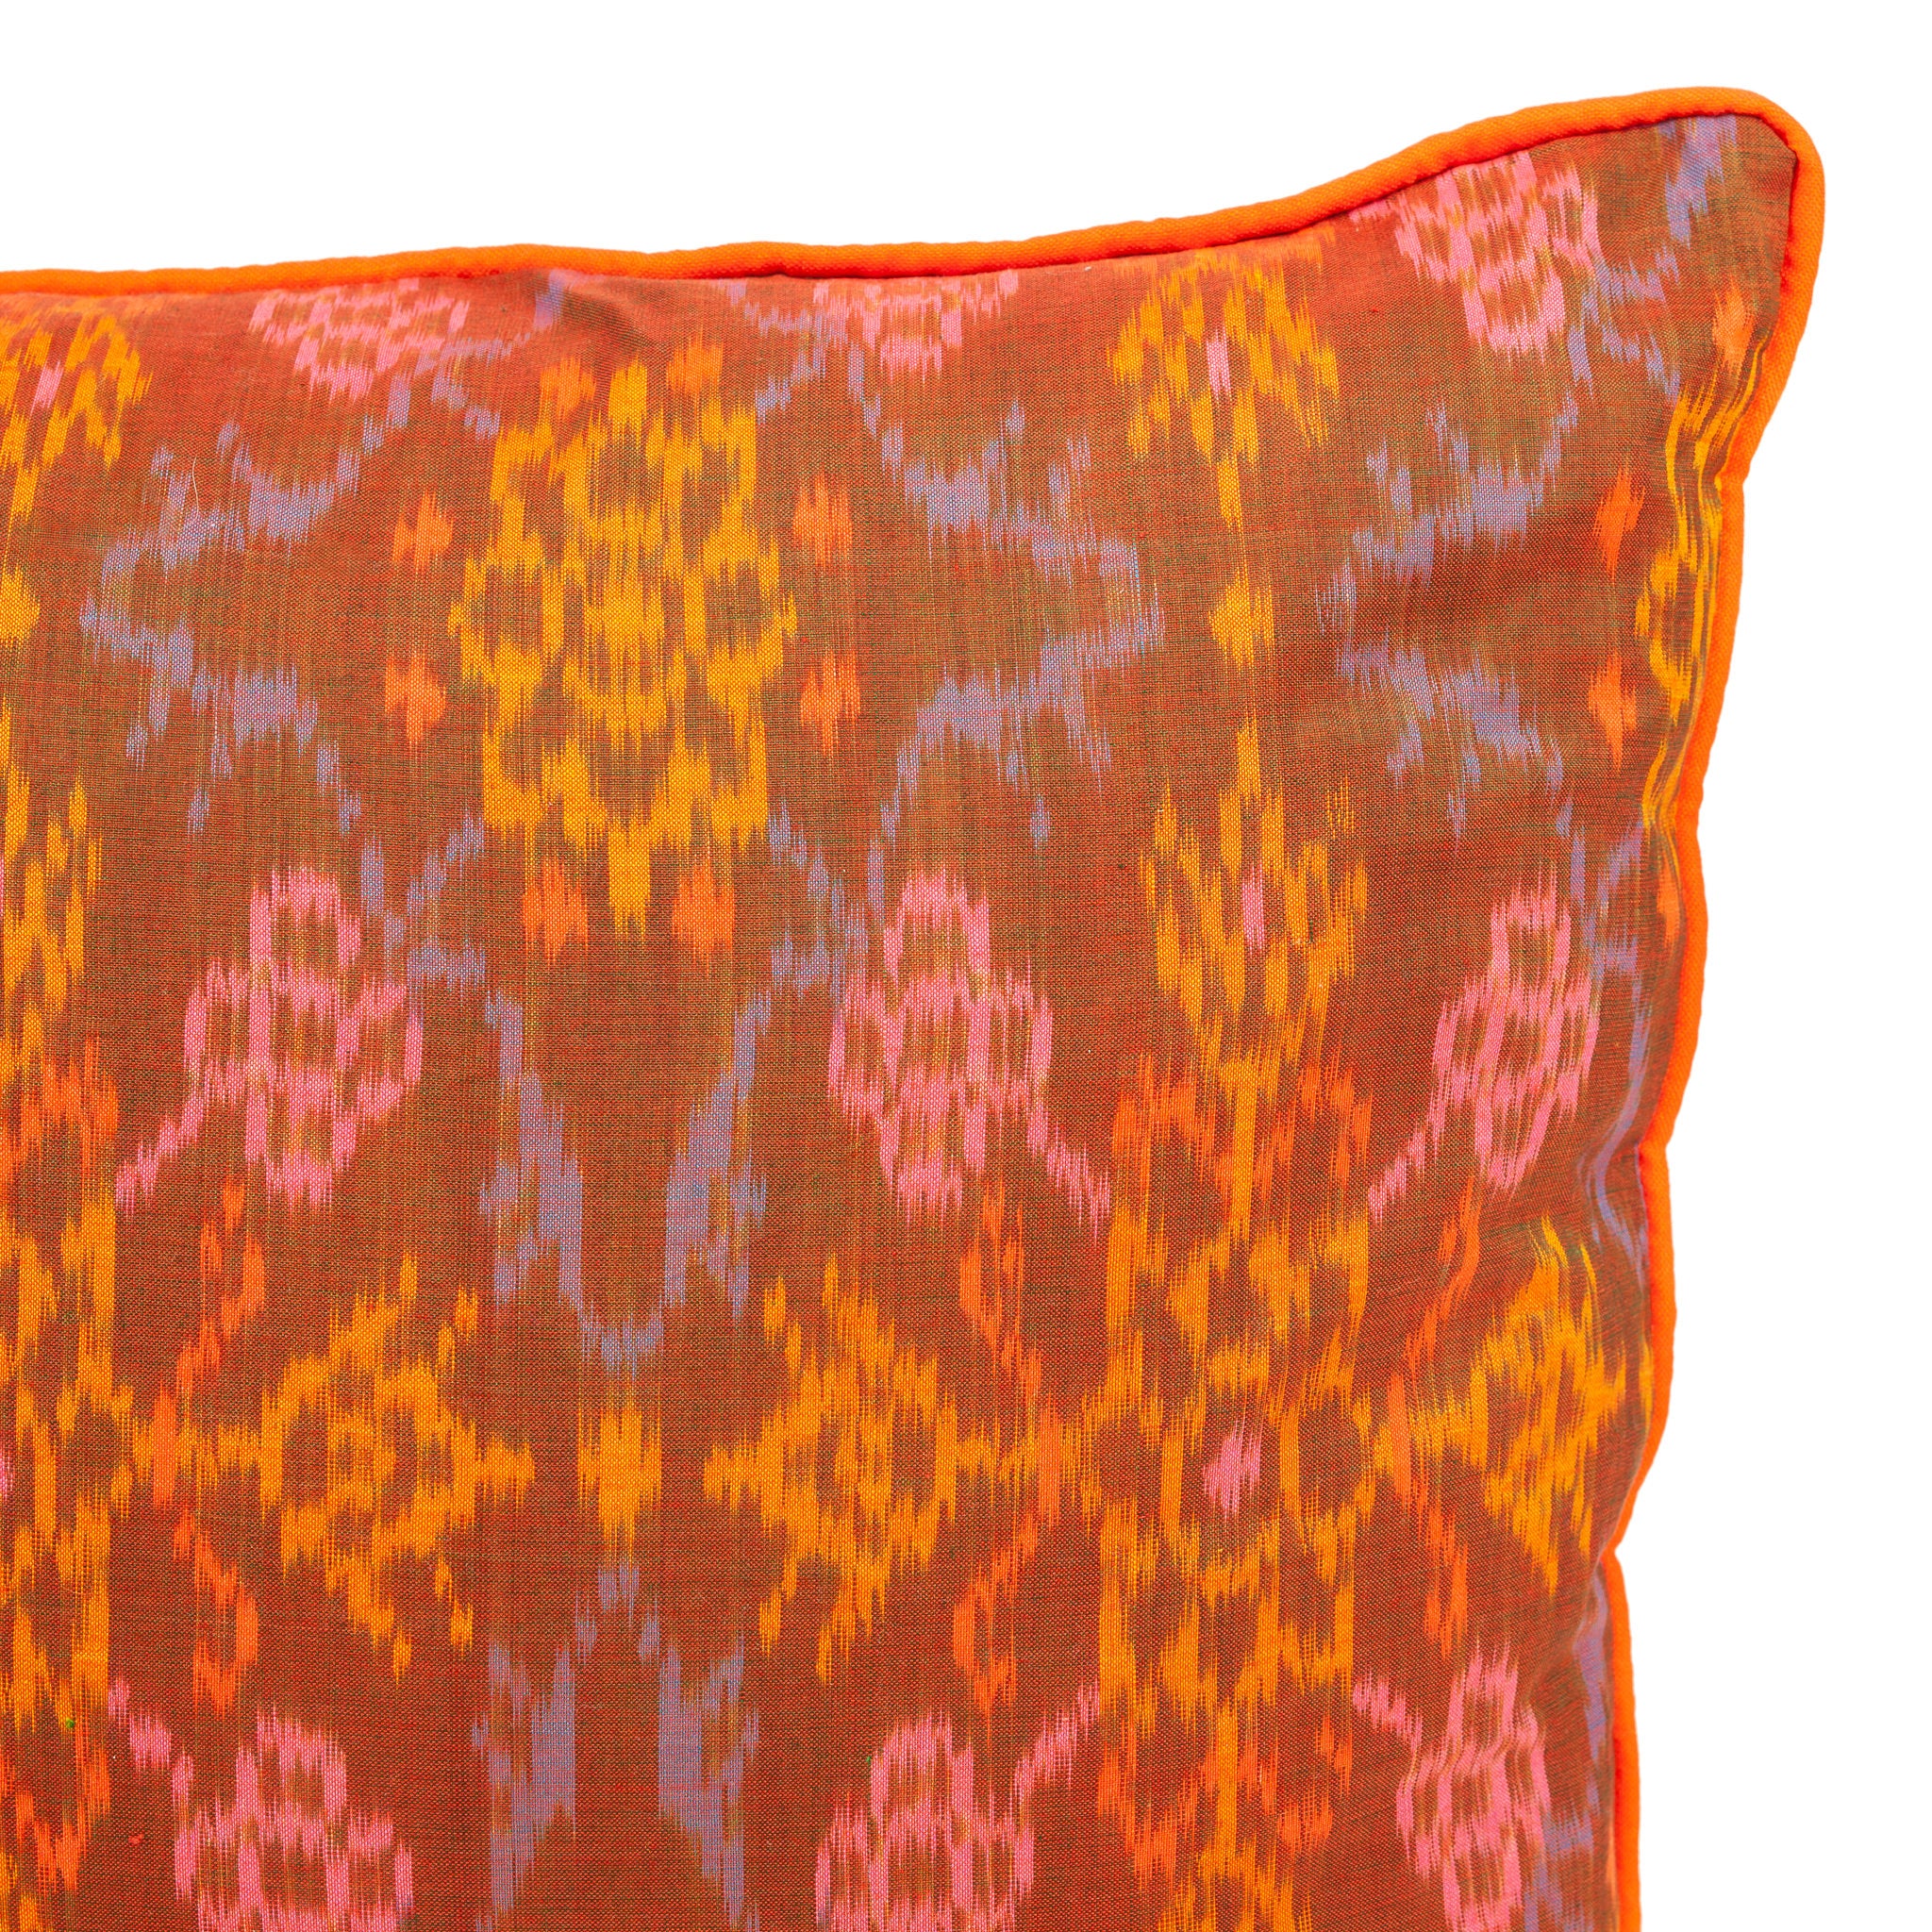 Orange, Pink and Pale Blue Ikat Square Scatter Cushion from Bali, Indonesia - DETAIL